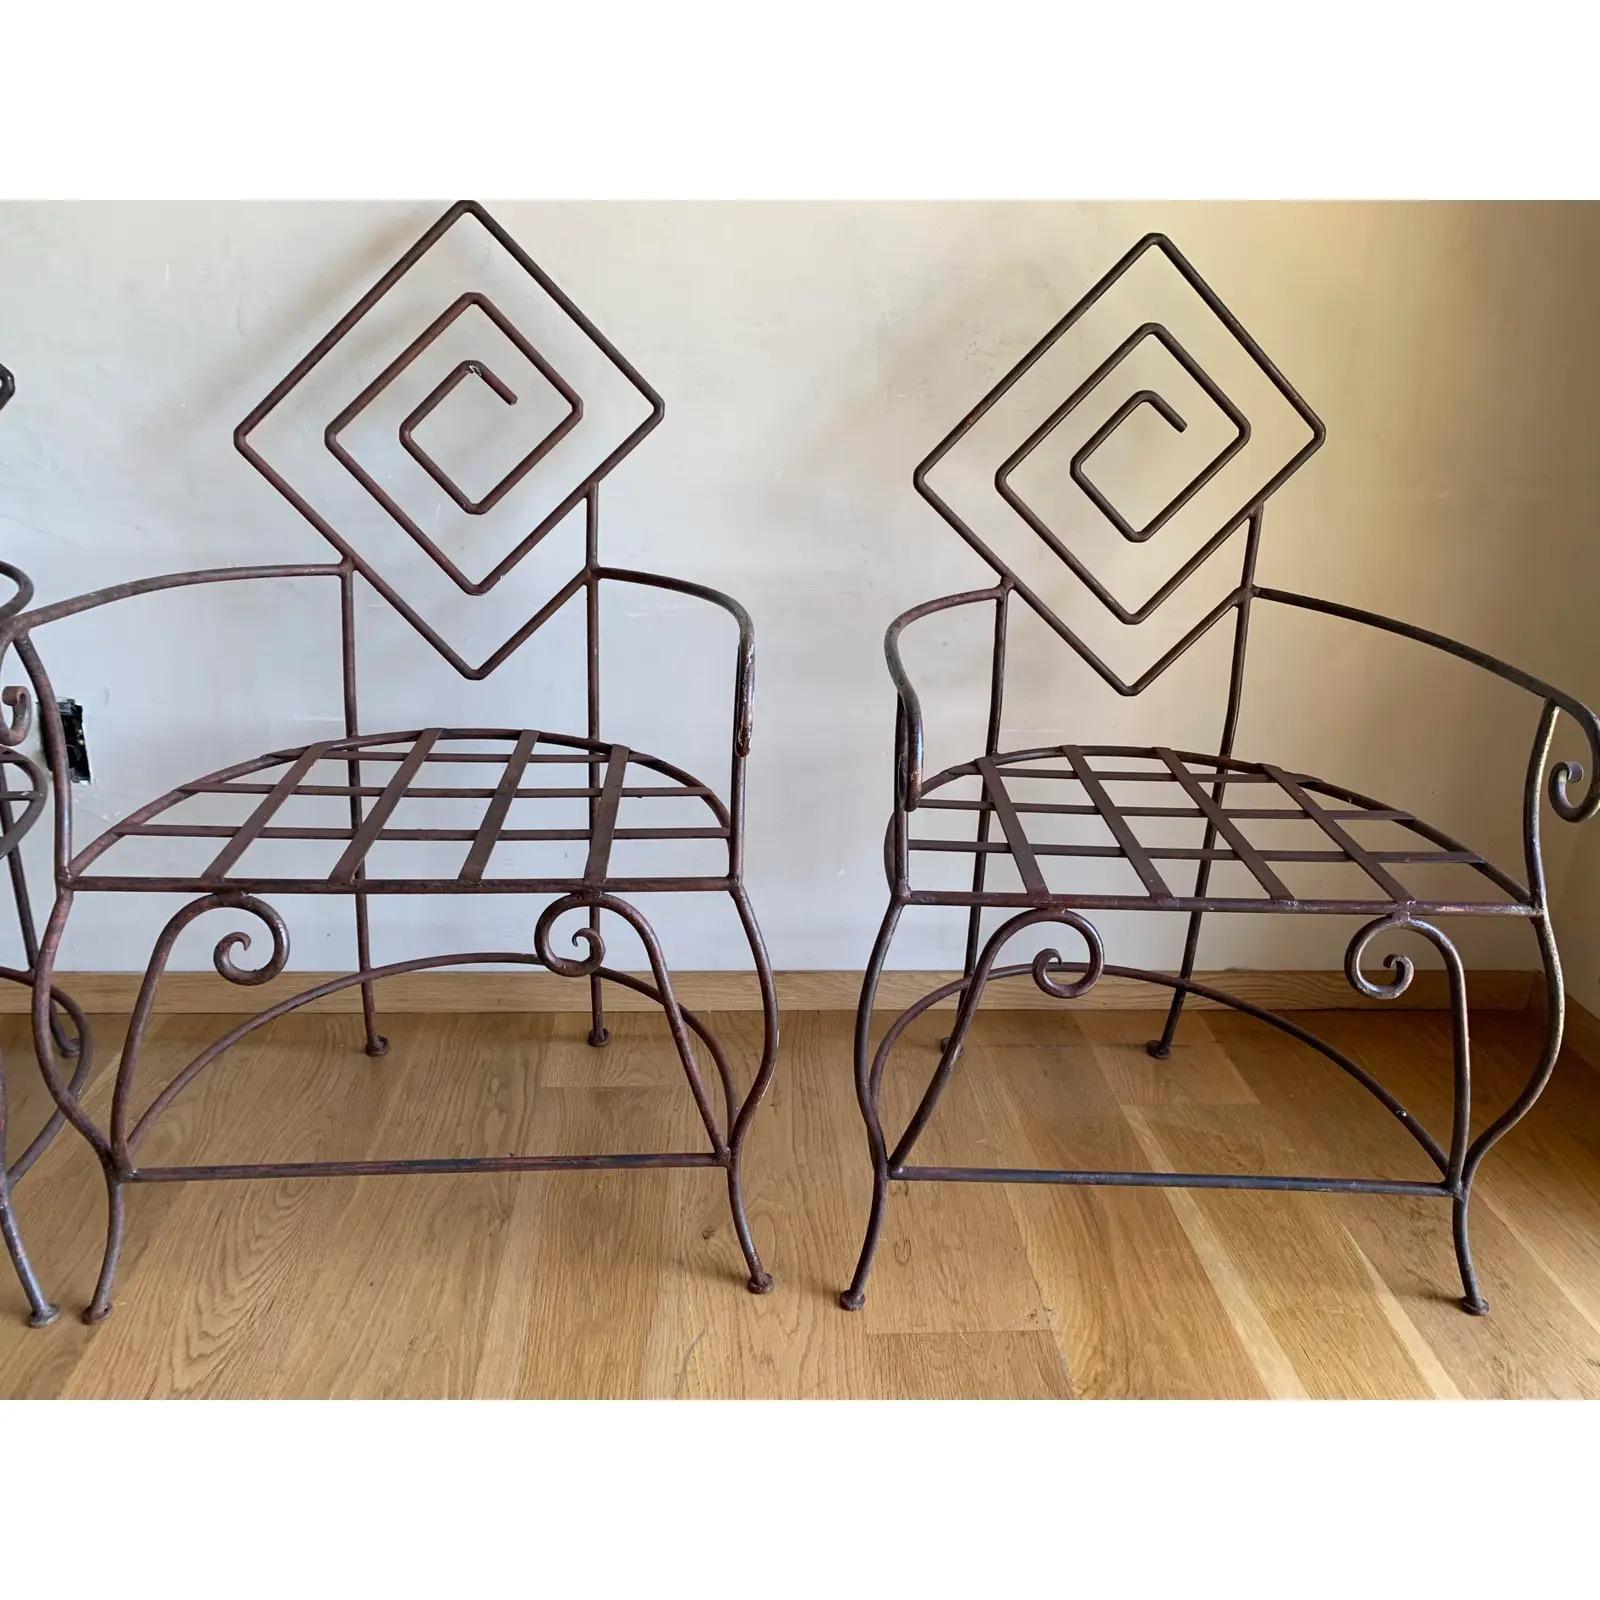 Vintage Artisan Iron Geometric Sculptural Frank Lloyd Wright Style Armchairs-4 For Sale 5